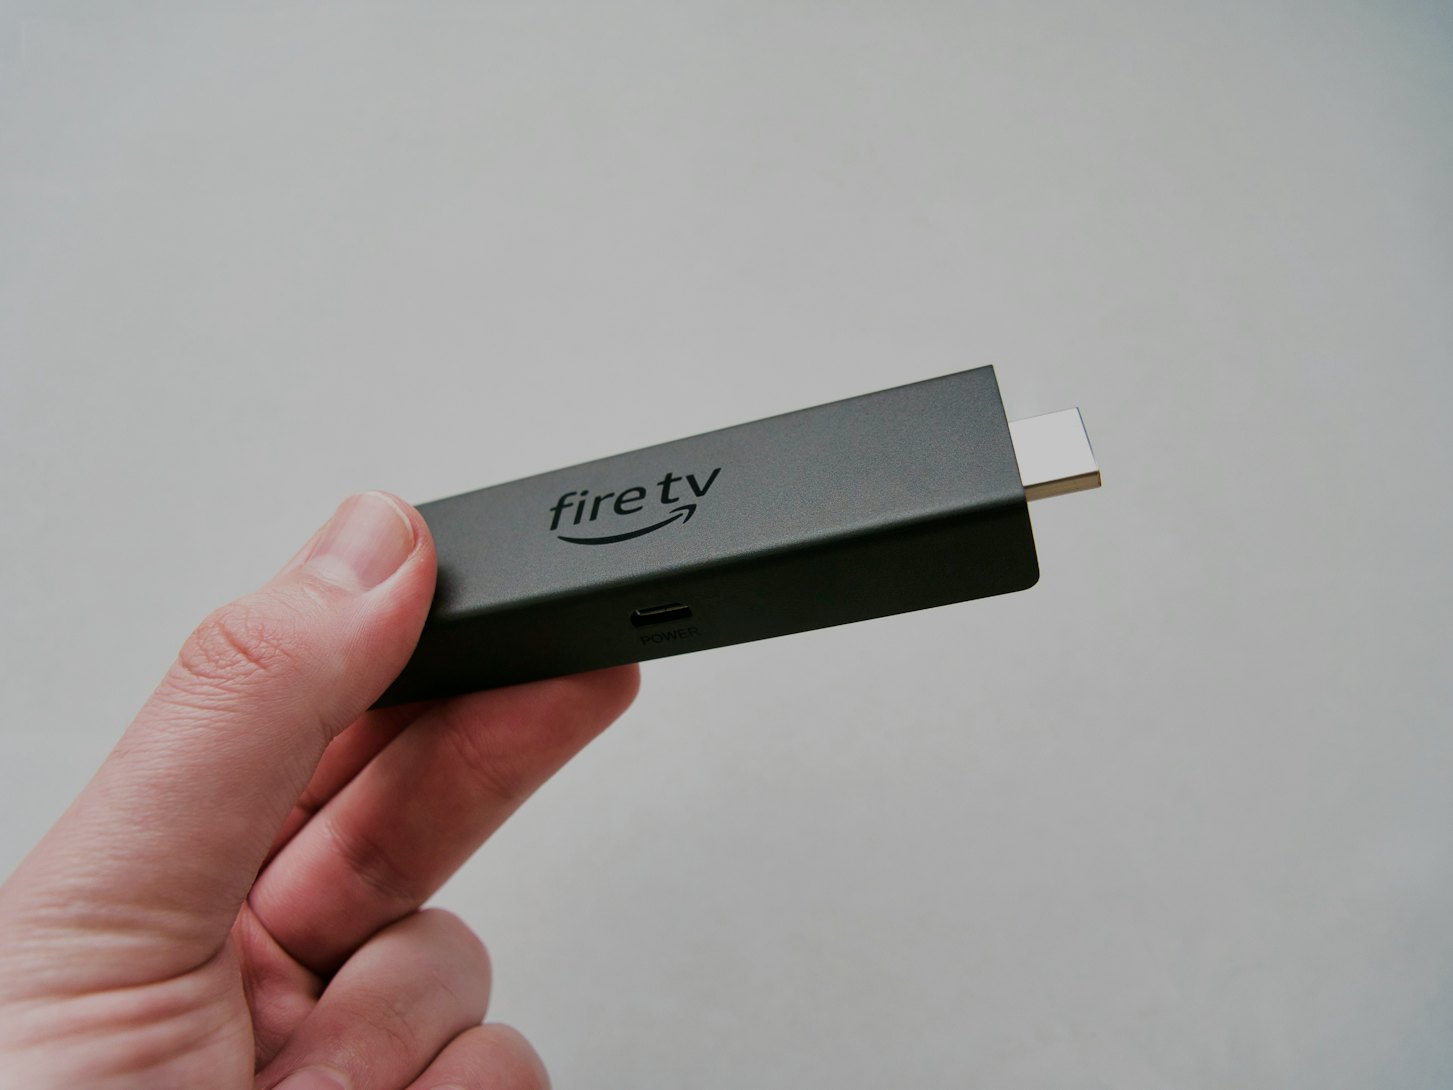 The 'New'  Fire Stick 4k Max Review 